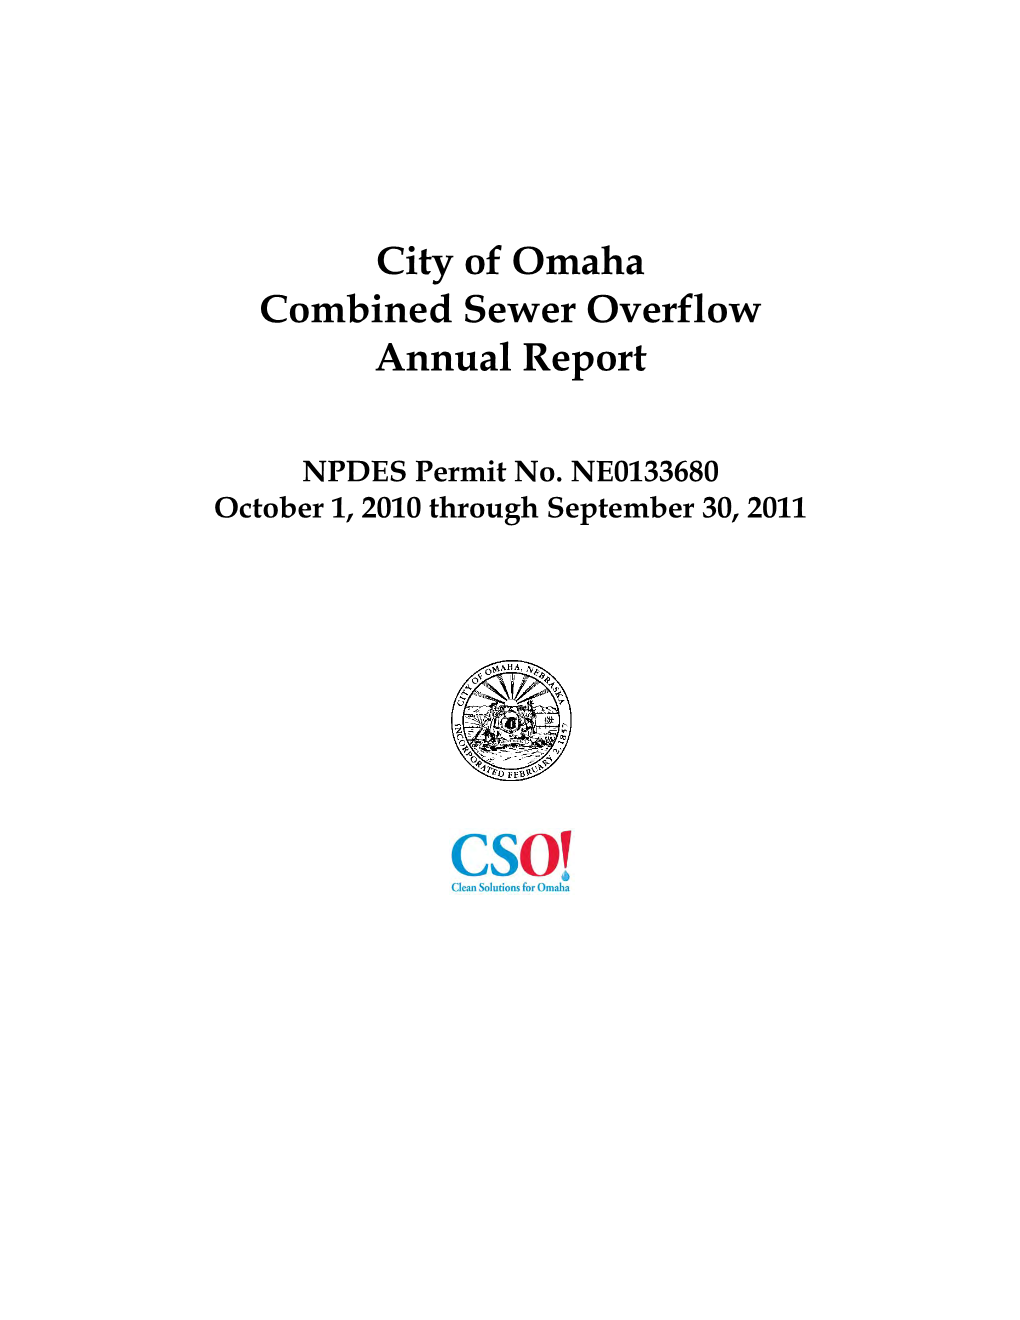 City of Omaha Combined Sewer Overflow Annual Report